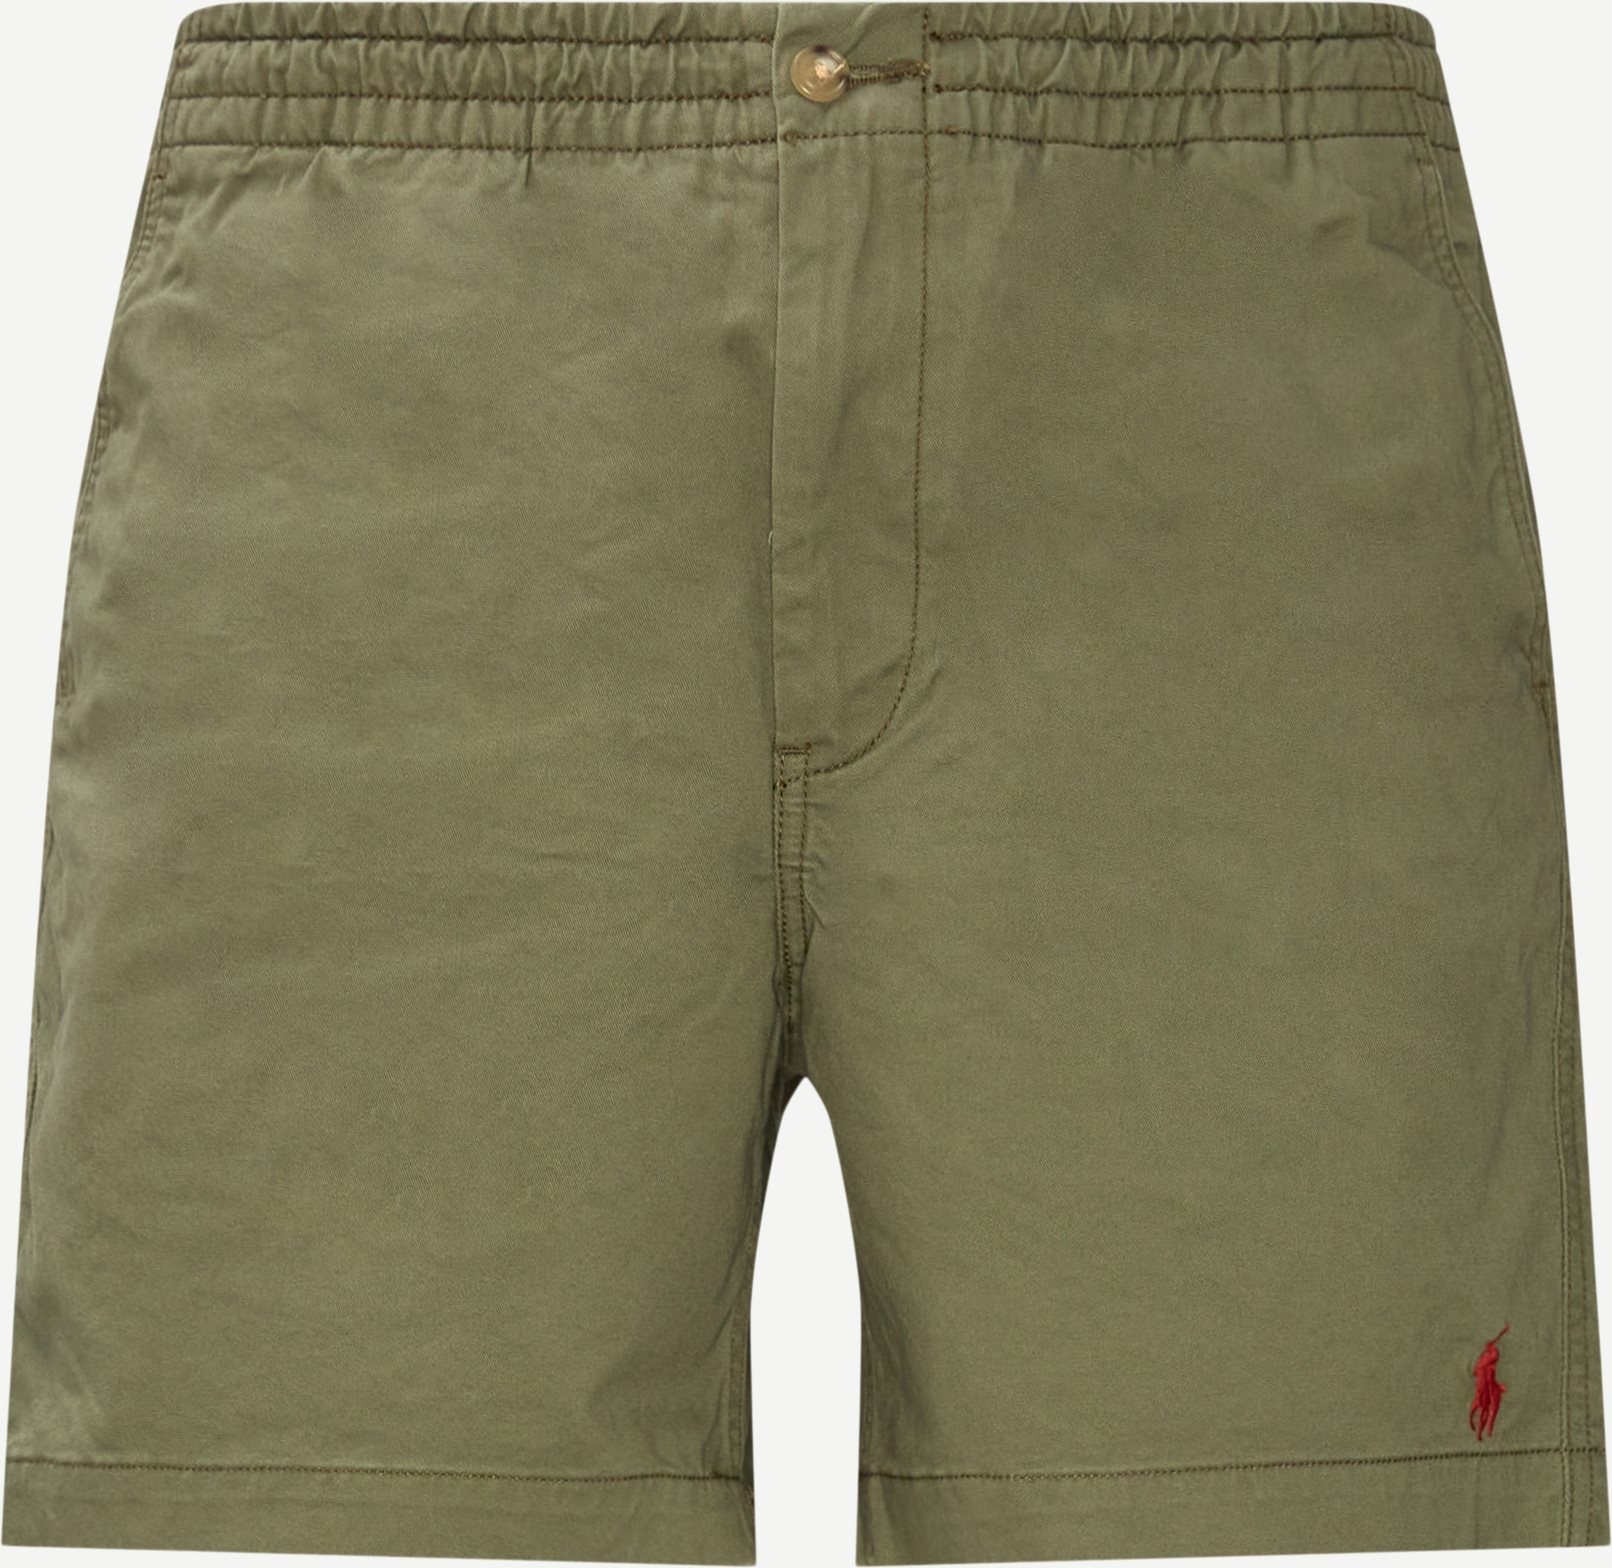 Chino Shorts - Shorts - Classic fit - Army